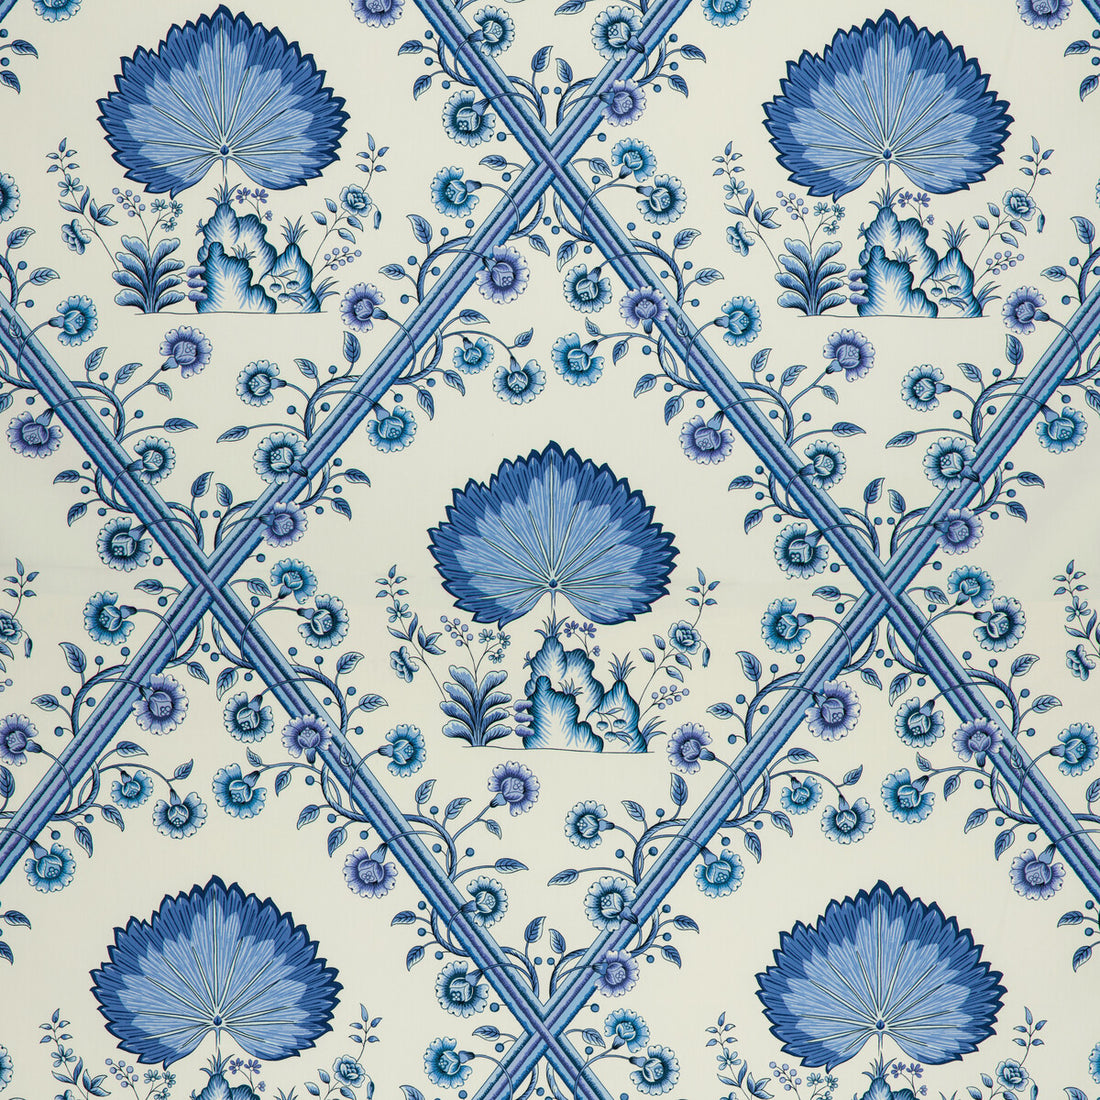 Loire Print fabric in blue color - pattern 8020123.5.0 - by Brunschwig &amp; Fils in the Louverne collection